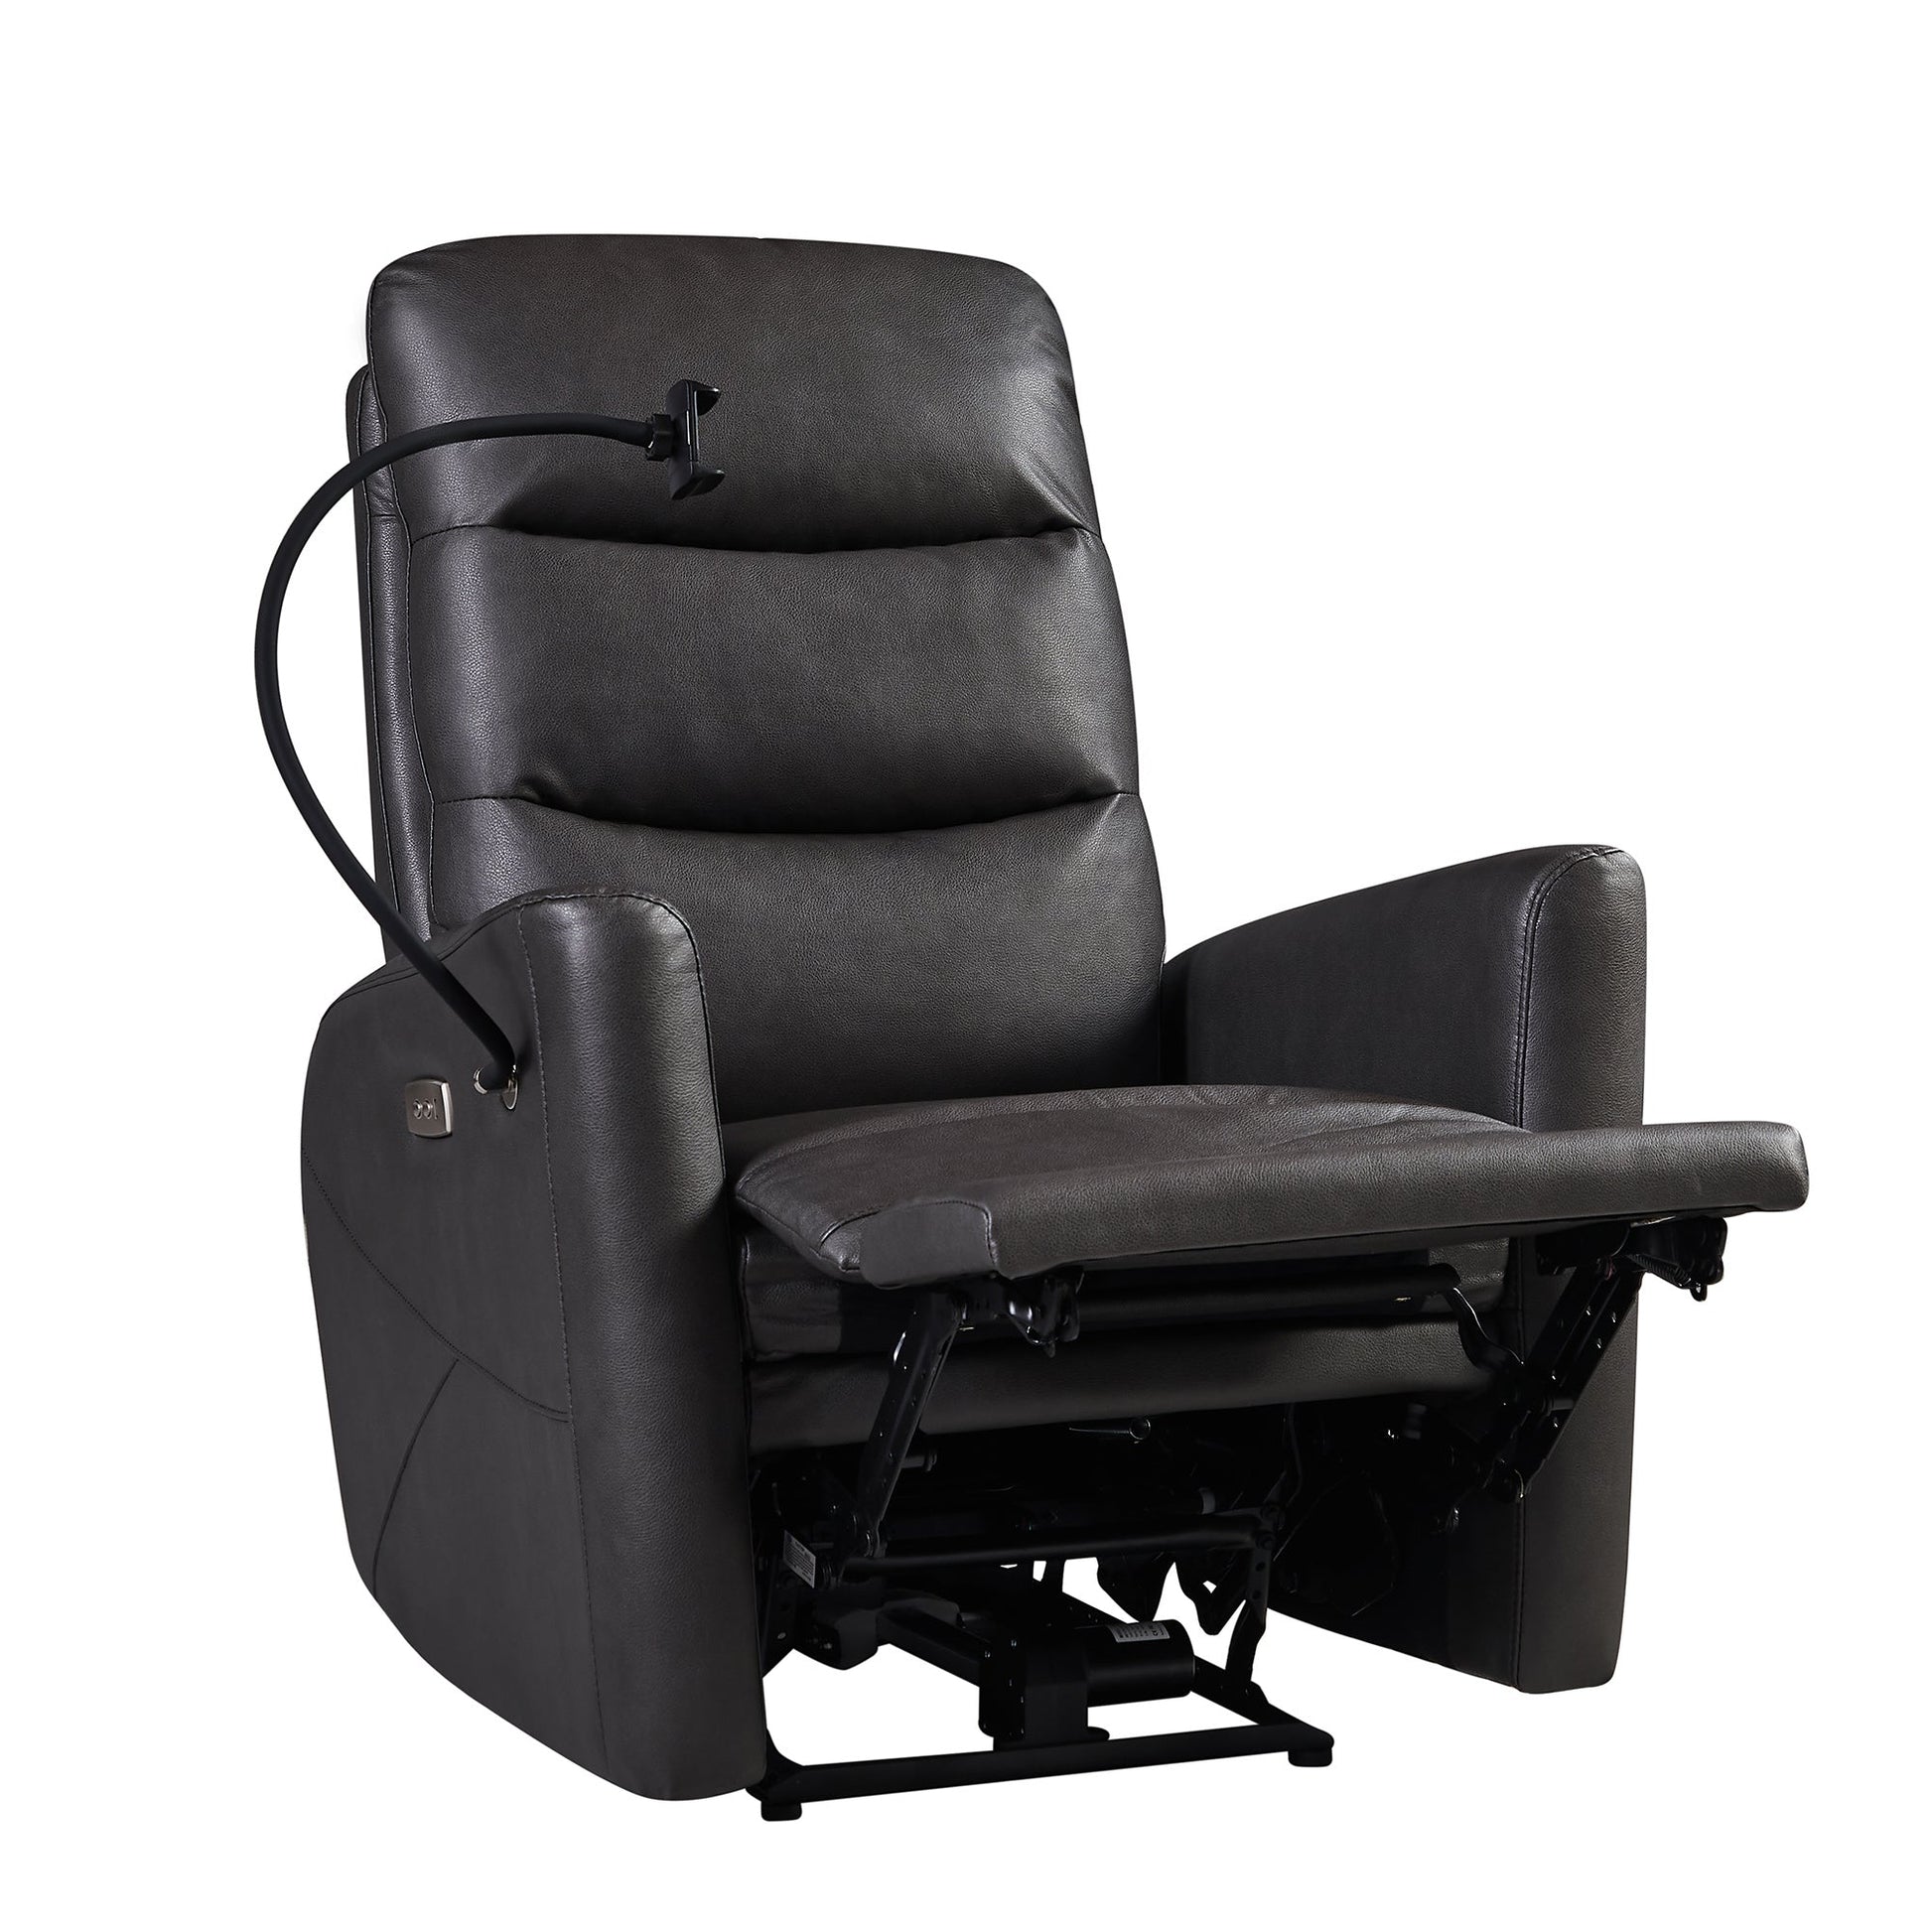 Hot selling For 10 Years ,Recliner Chair With Power function easy control big stocks , Recliner Single Chair For Living Room , Bed Room Home Decor by Design